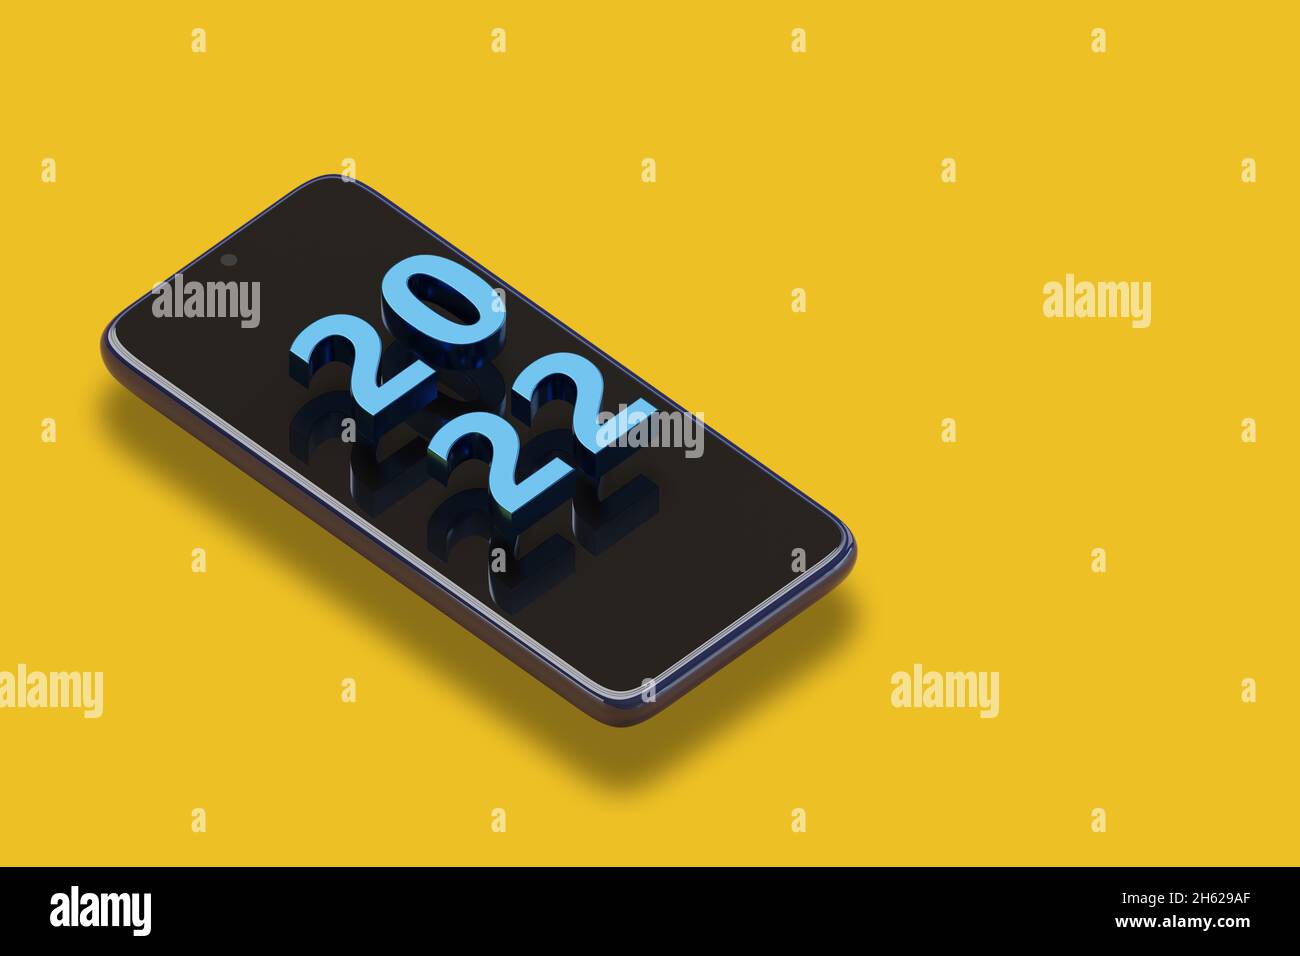 Mobile phone with 2022 text in three dimensions. New year concept. Isometric projection. 3d illustration. Stock Photo